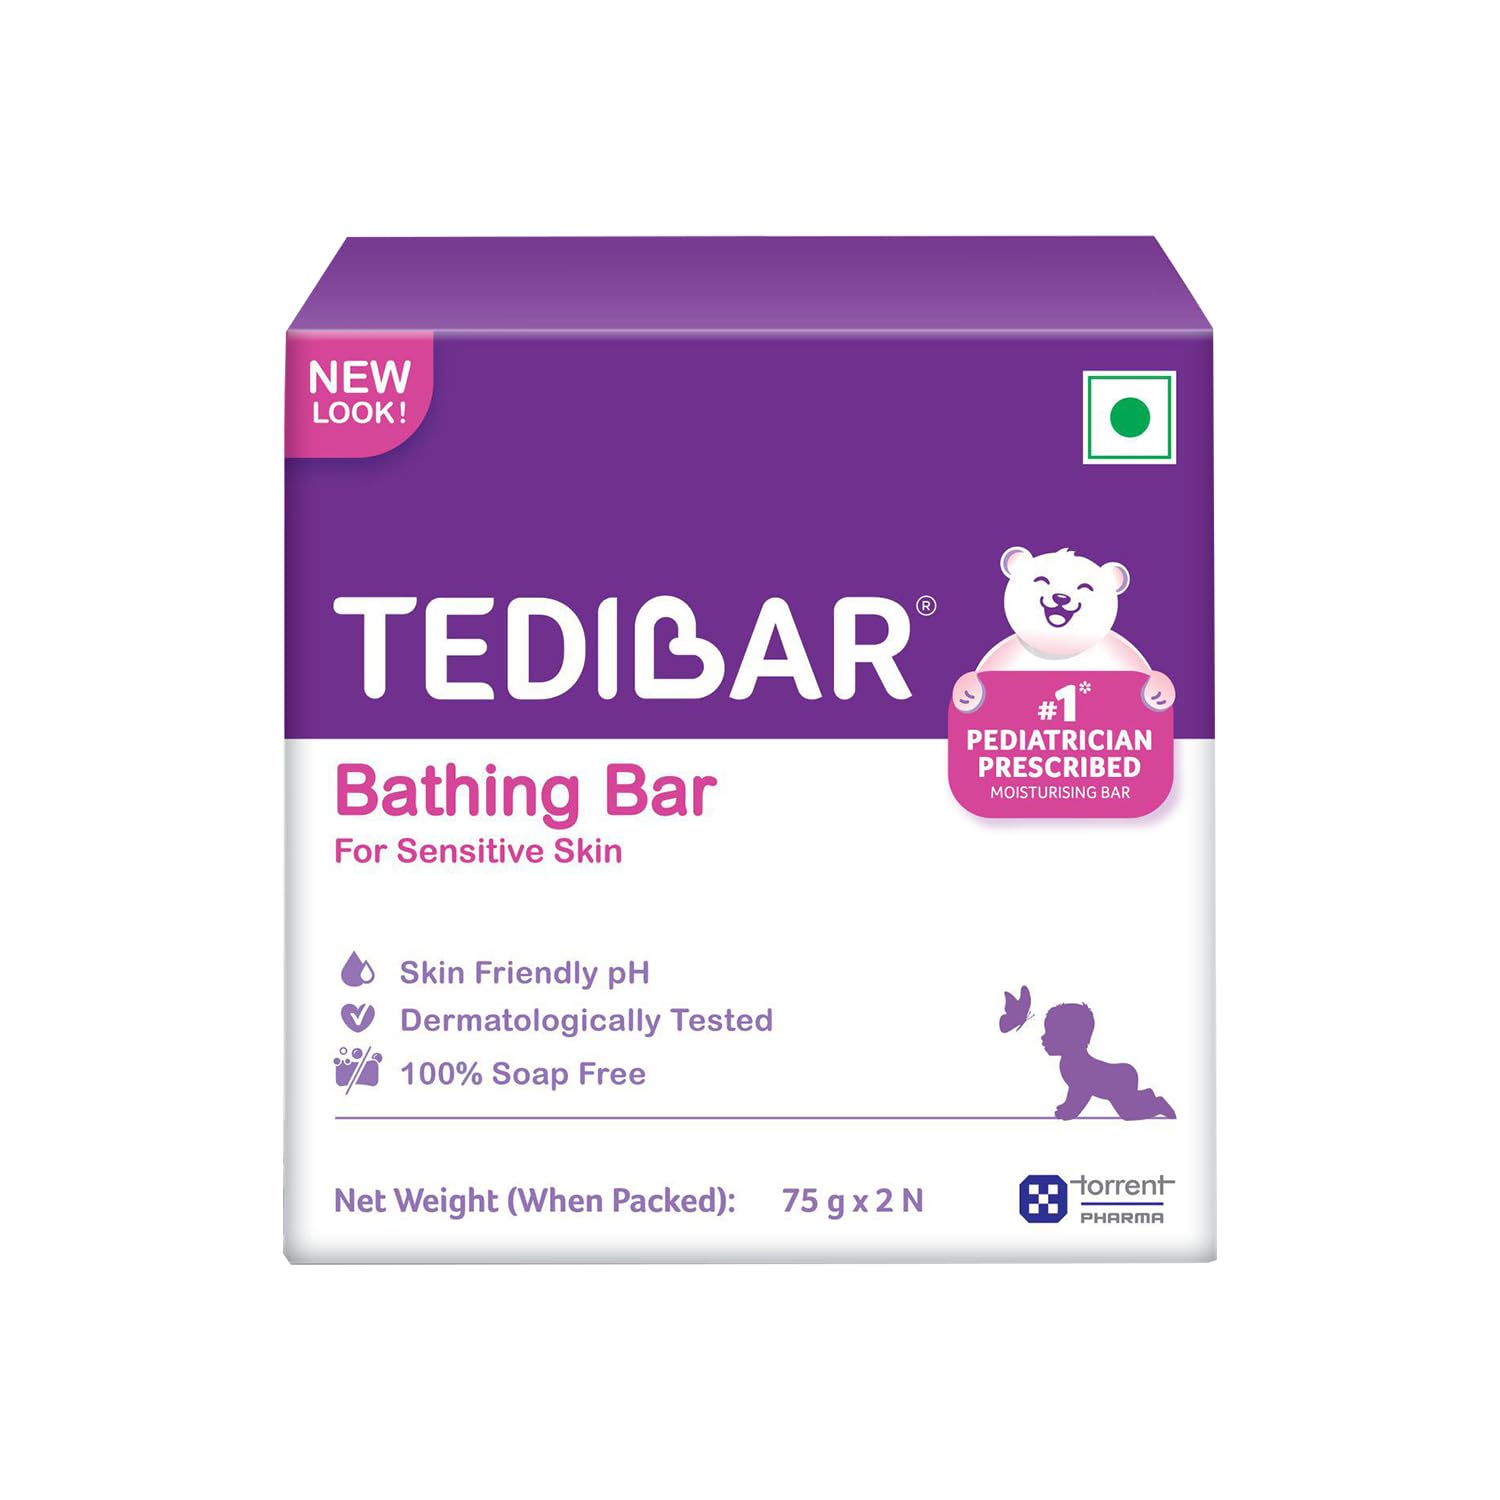 CURATIO Tedibar Bathing Soap for baby Pack of 2 (75g Each)